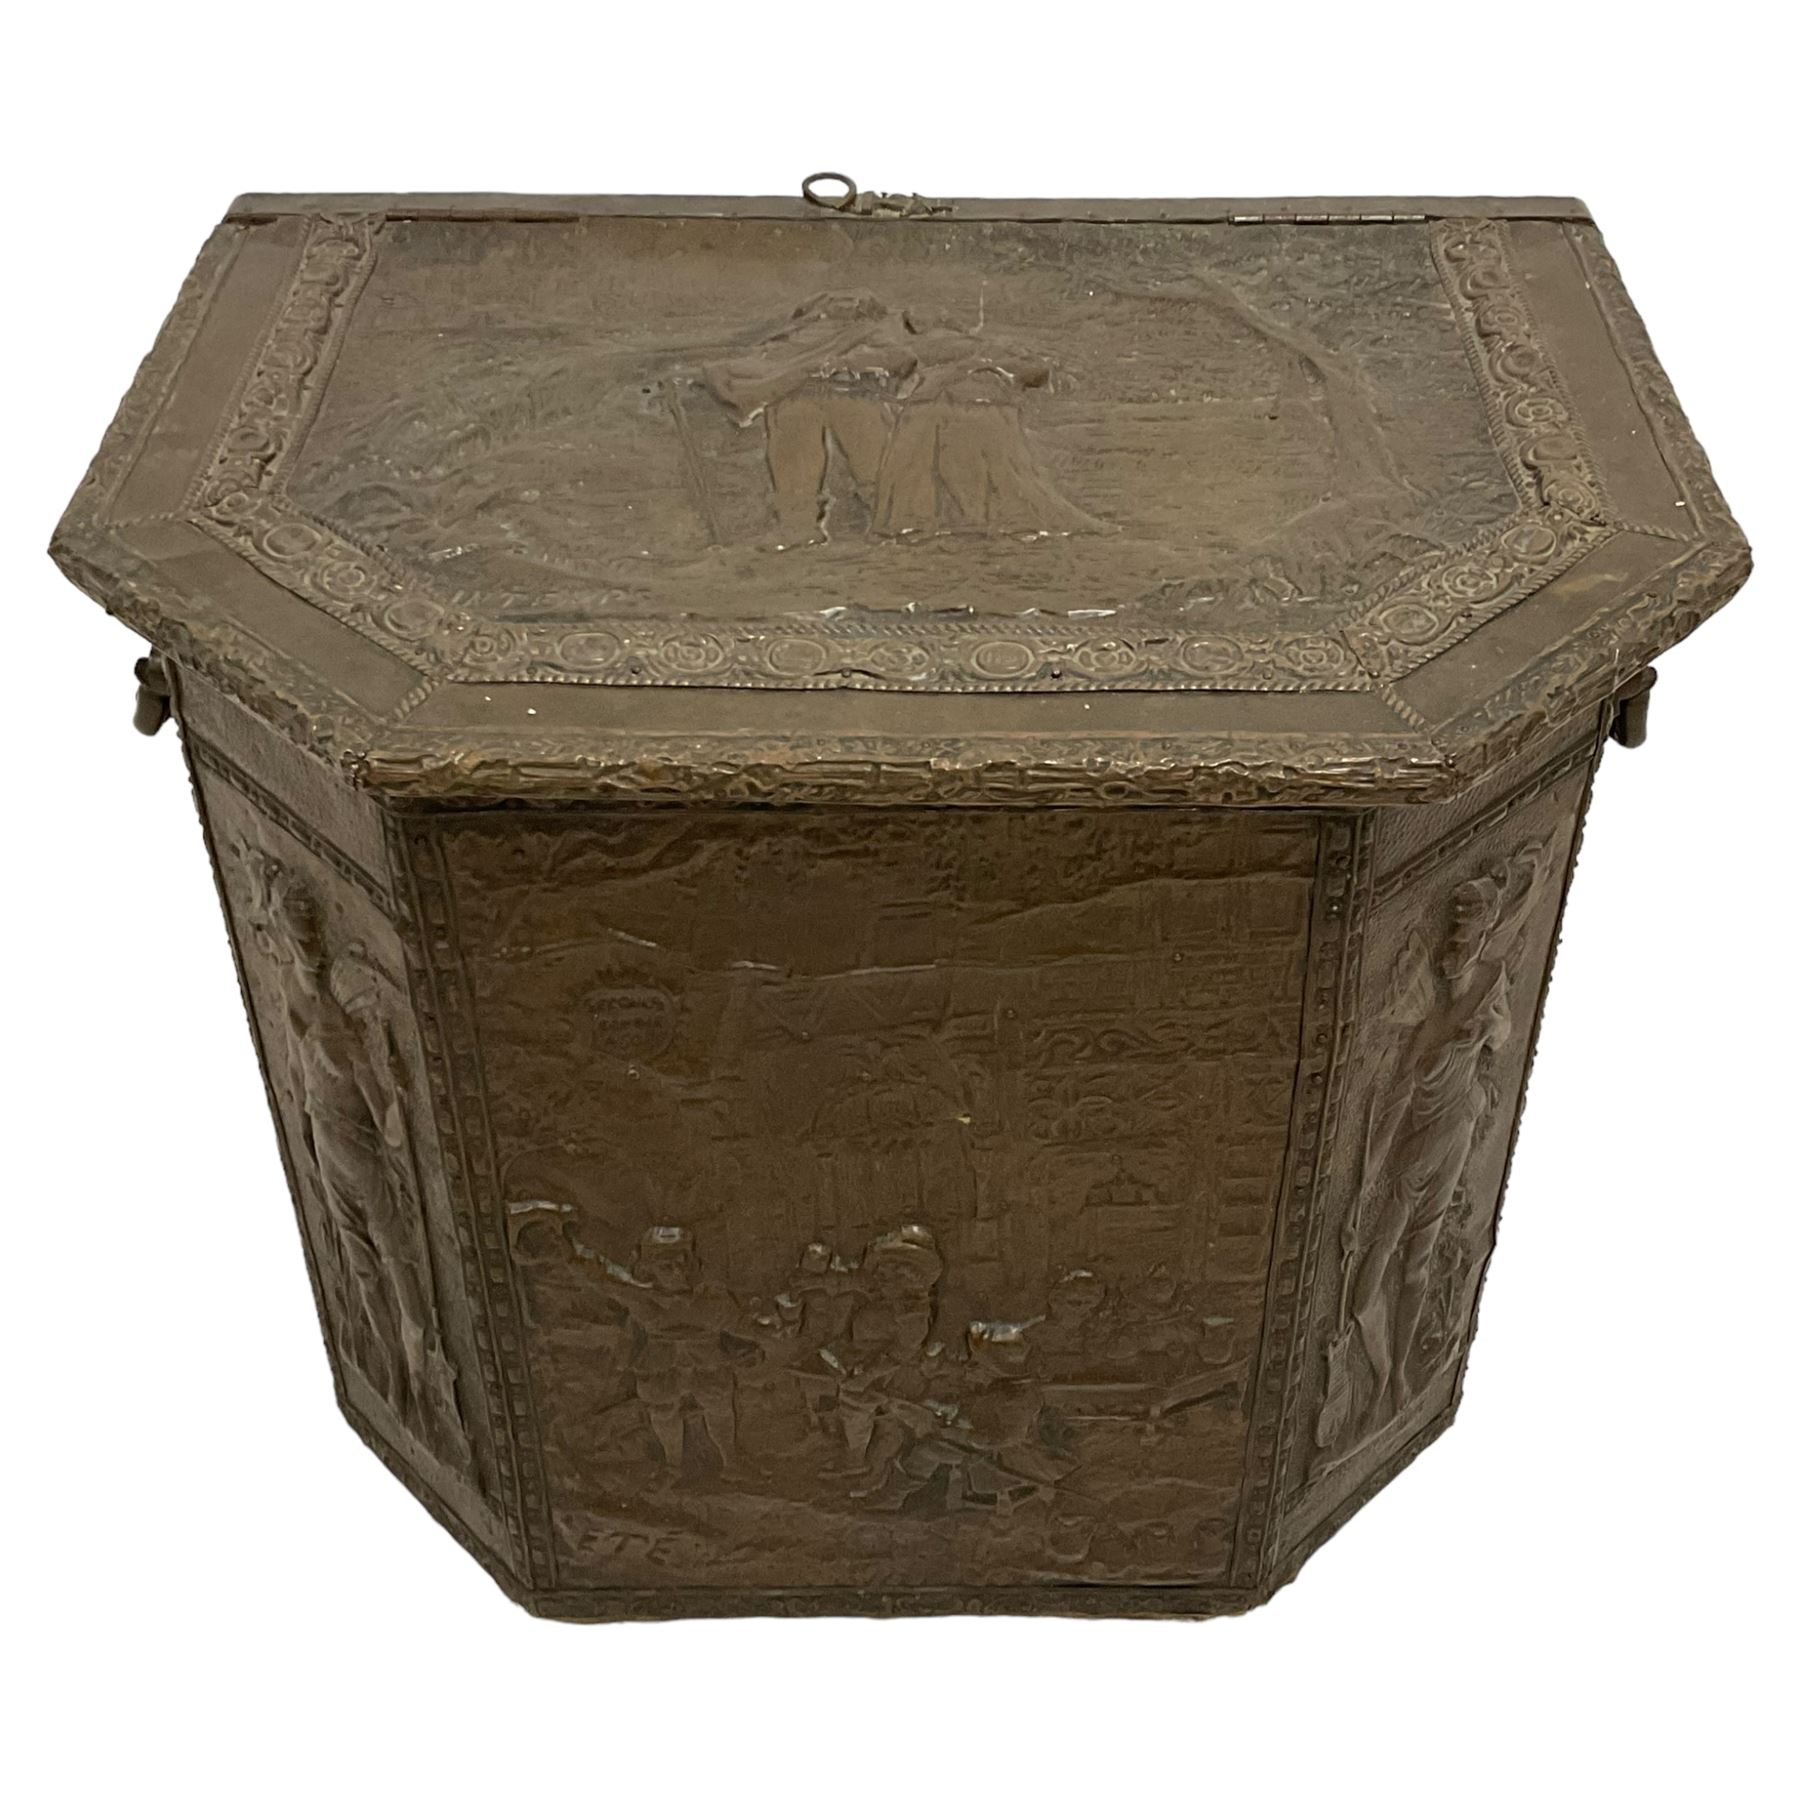 Large 19th century wooden and brass repousse coal box